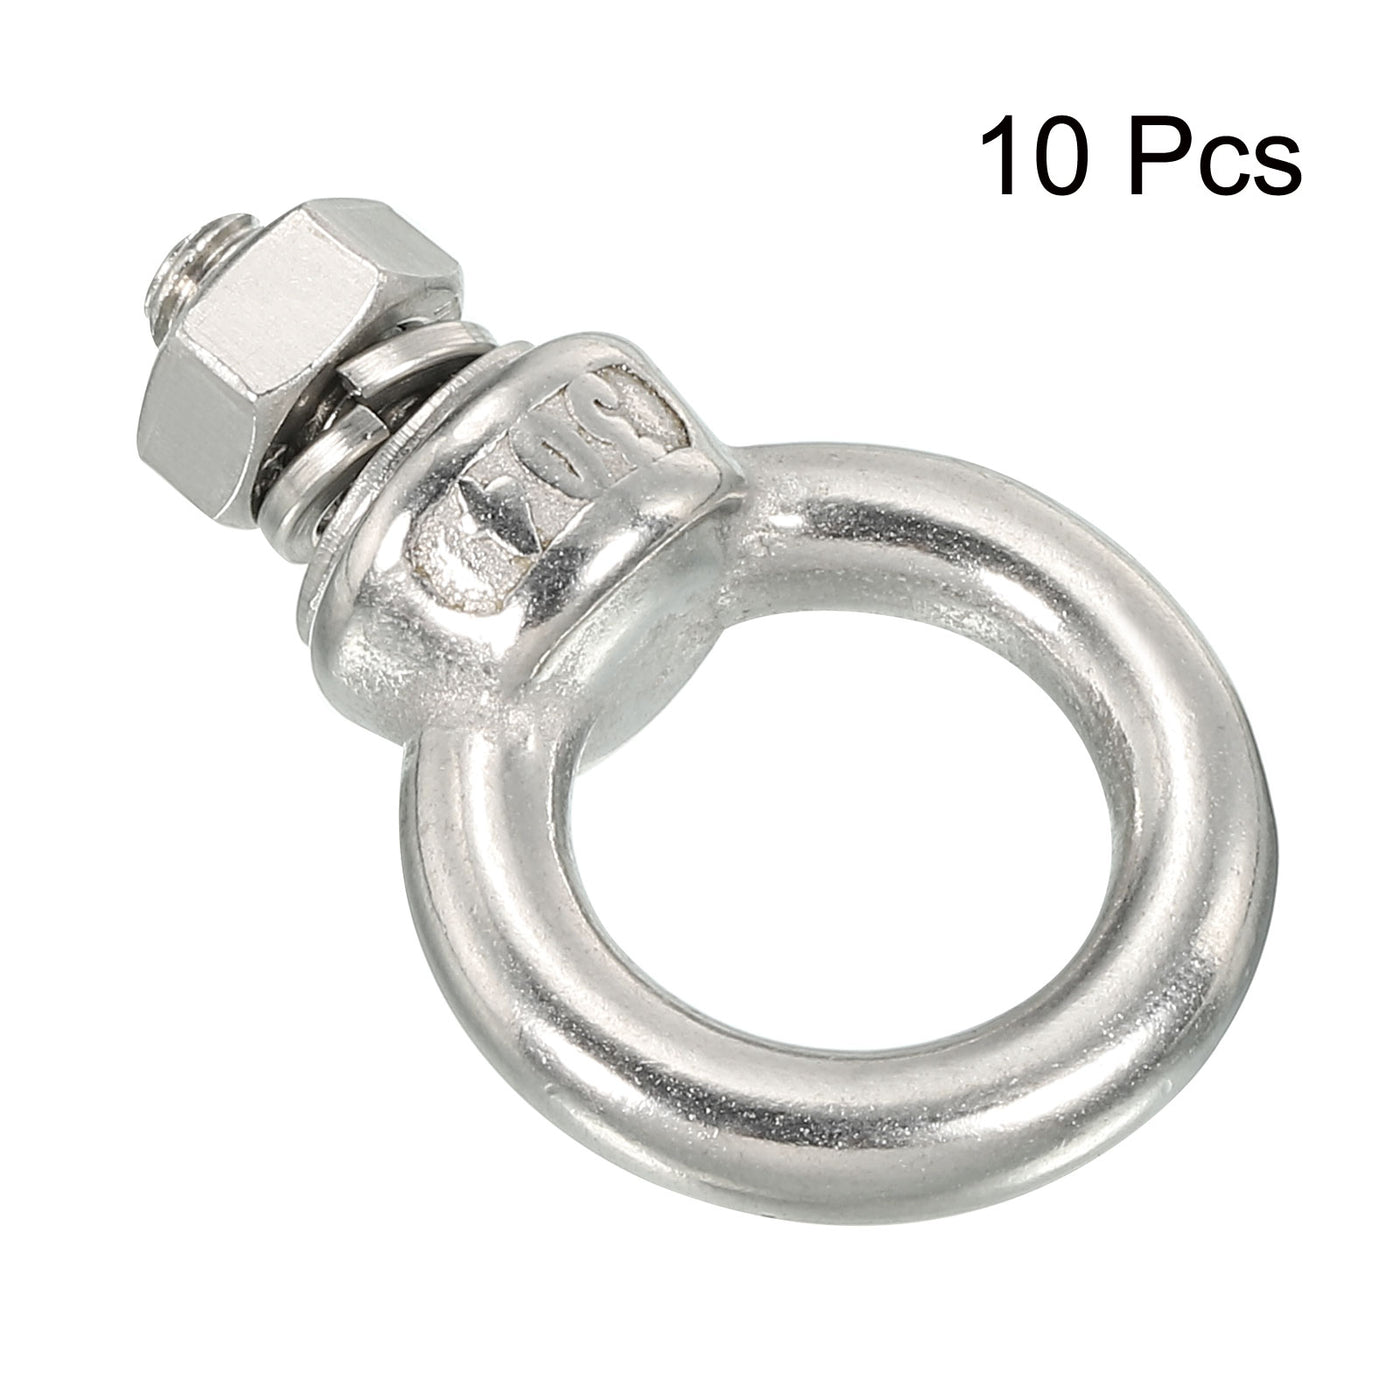 uxcell Uxcell M6x12 1/4"x1/2" Stainless Steel Eye Bolts Threaded Screw Eyebolt Shoulder Ring with Nuts Washers for Lifting Hanging, 10 Set